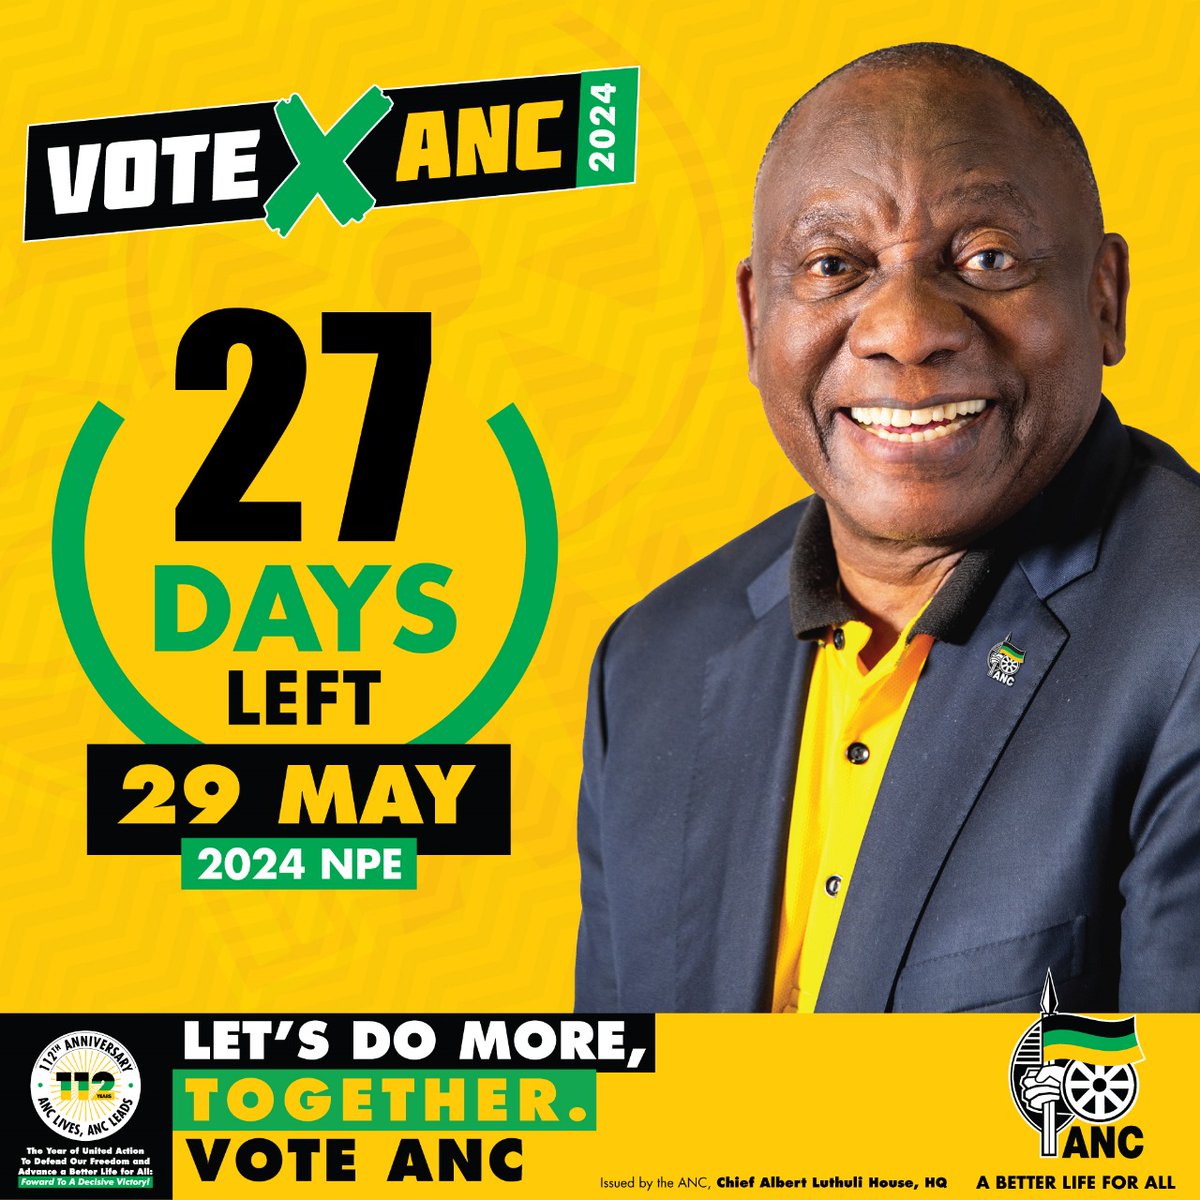 27 days to go until the 2024 National and Provincial Elections on the 29th of May 2024!

1st Ballot: #VoteANC ❎
2nd Ballot: #VoteANC ❎
3rd Ballot: #VoteANC ❎

#VoteANC2024
#LetsDoMoreTogether ⚫️🟢🟡